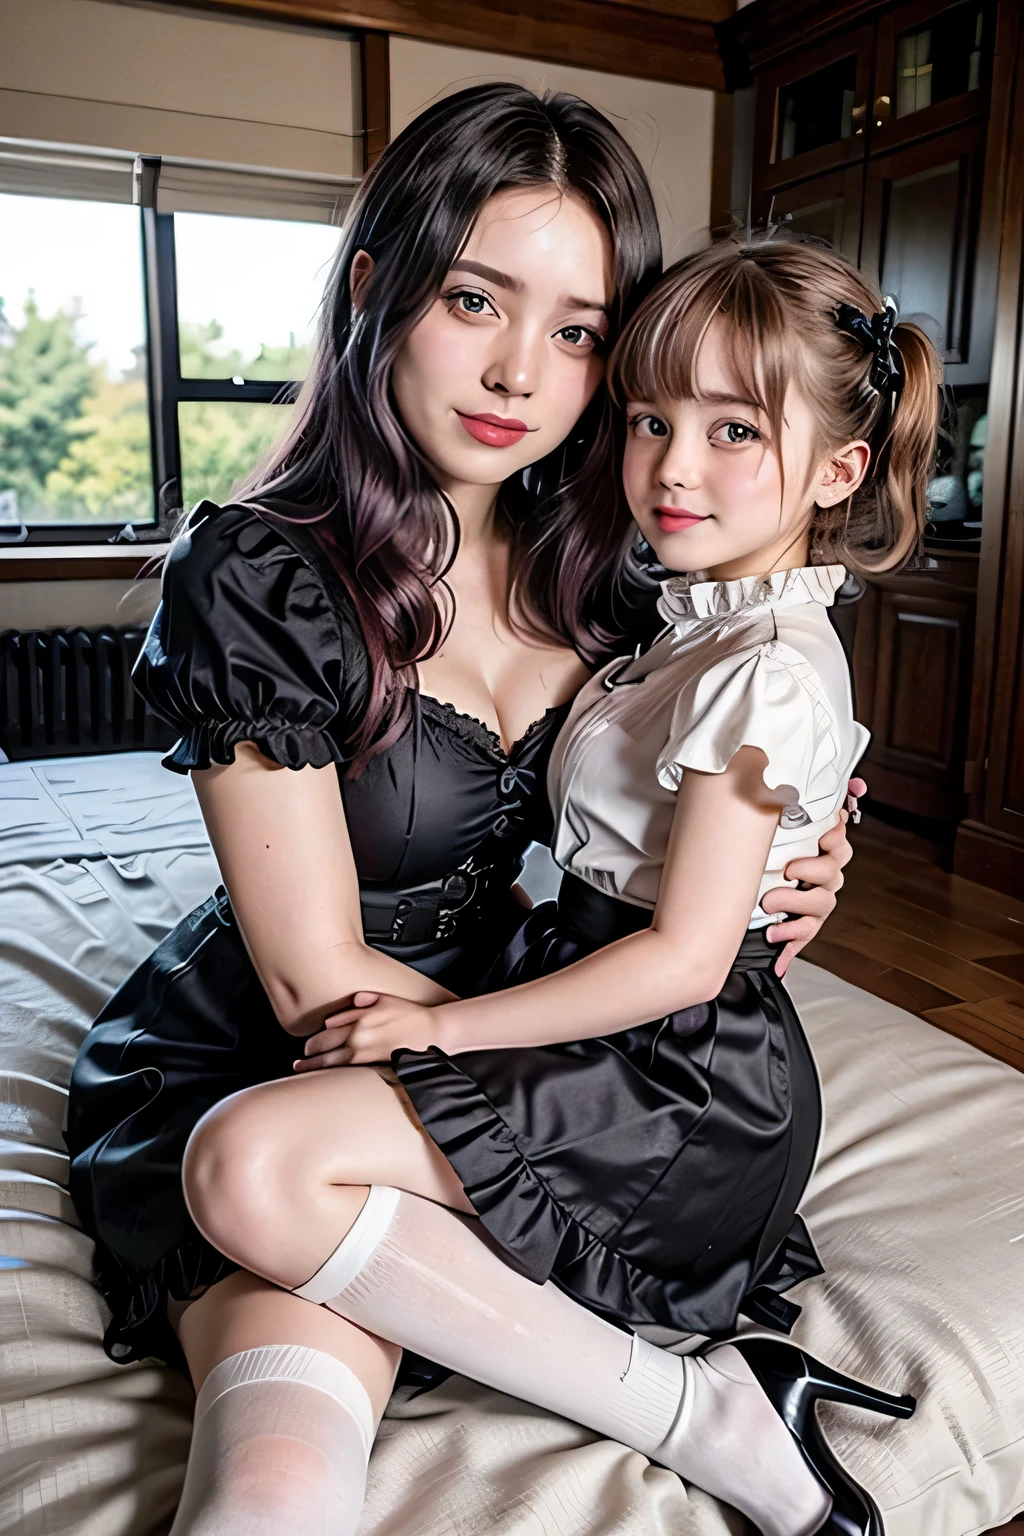 A 20-year-old woman and a 6-year-old girl, Wearing traditional maid uniform, , High heels, Heavy makeup, Beautifully detailed face, A 6-year-old girl is wearing glasses, Natural sunlight, 20 year old woman has purple hair, Old Western-style building, Big Breasts, A 6-year-old girl is looking down, A 20-year-old woman is looking at a girl, A 20-year-old woman is 170 cm tall., Anatomically correct body, A 6-year-old girl is 100cm tall, , A 20-year-old woman is giving a back hug, Red lipstick, Black skirt with frills, Chic pumps, Chunky Heel, Garter belt and white stockings, They are both smiling., A 20-year-old woman is holding a 6-year-old girl in her arms, Two very cute people, , , , , , , , ,